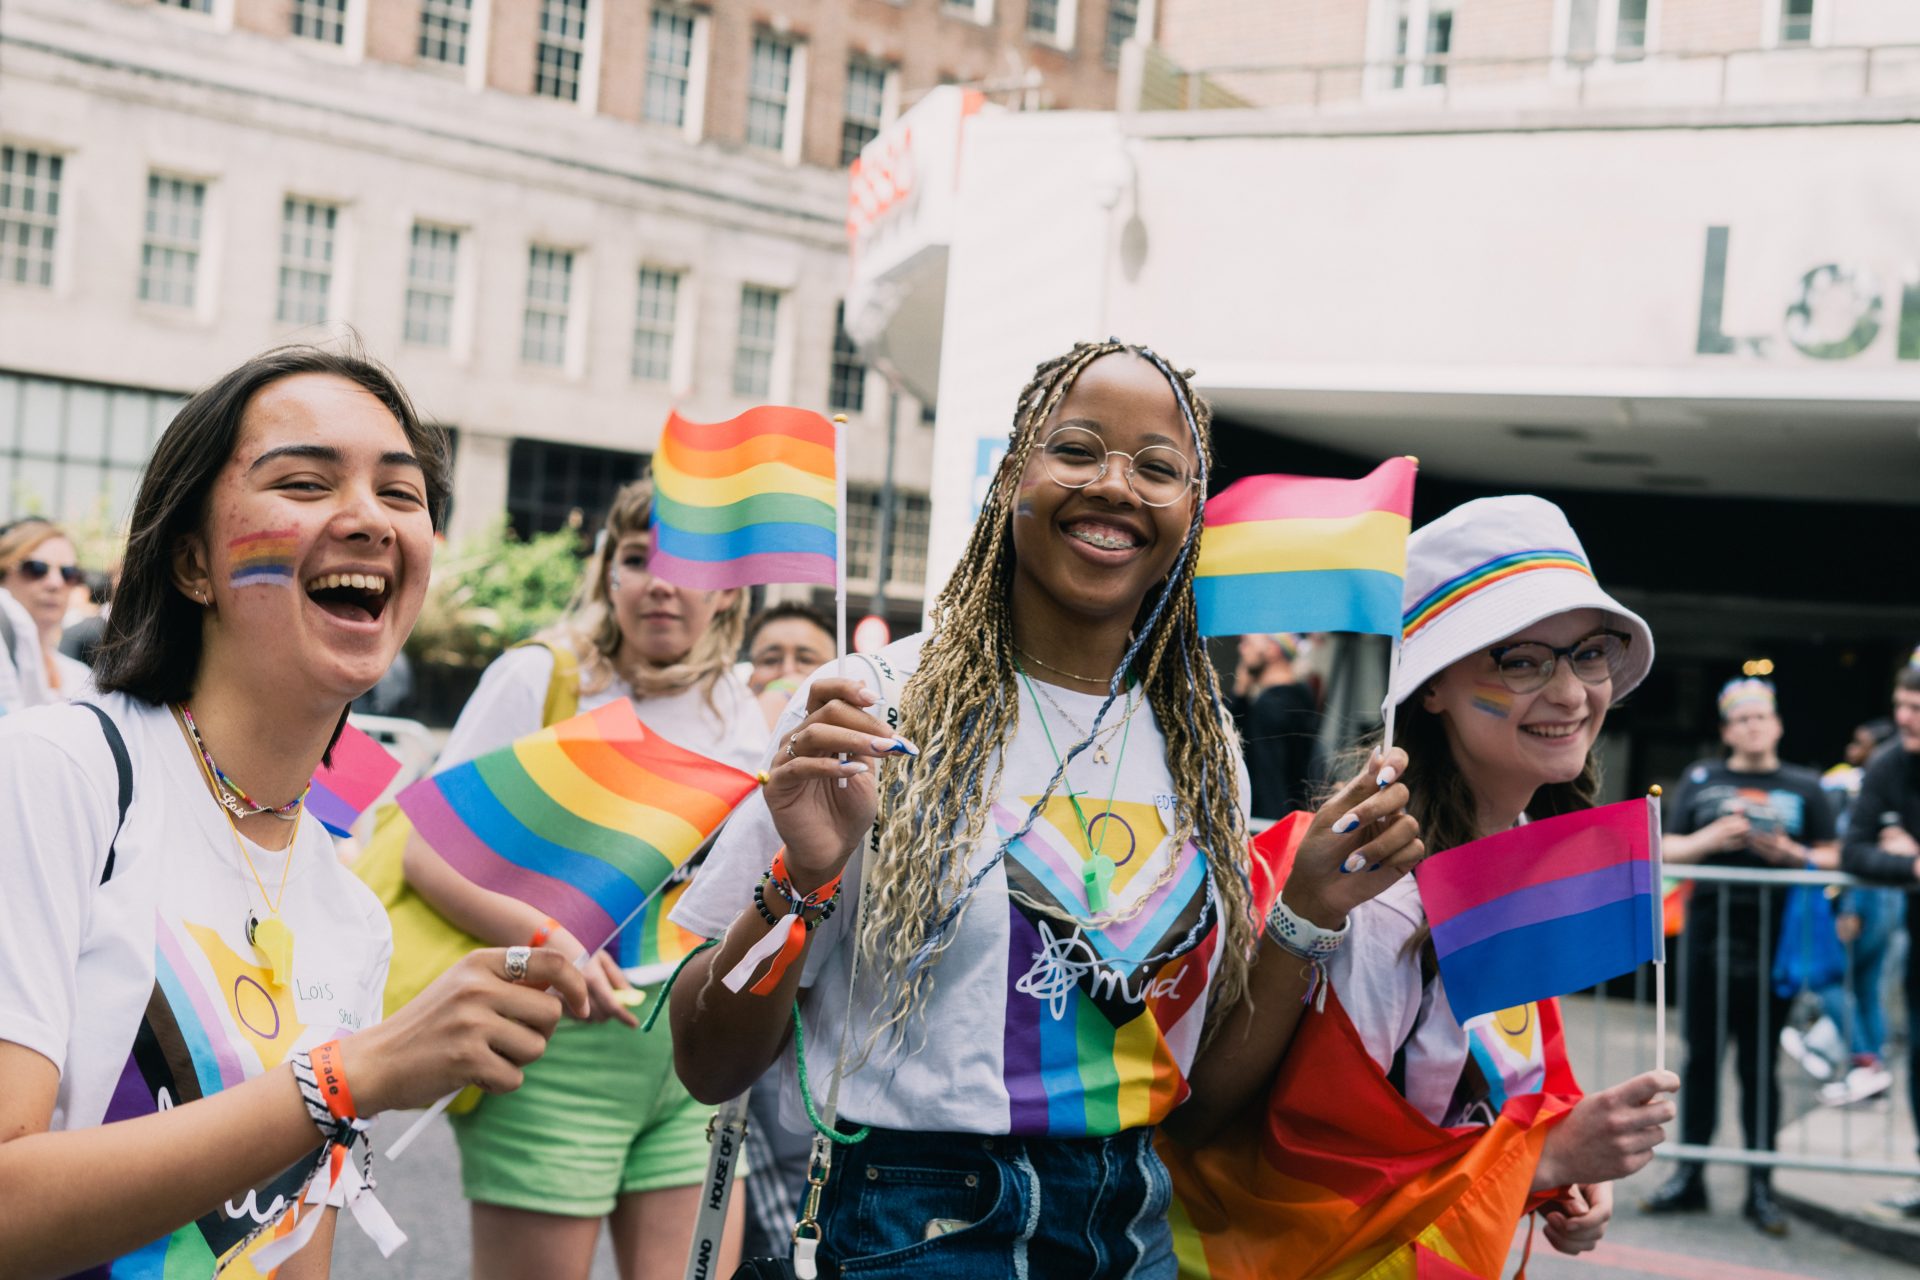 How can we support the mental health of LGBTQ+ young people?